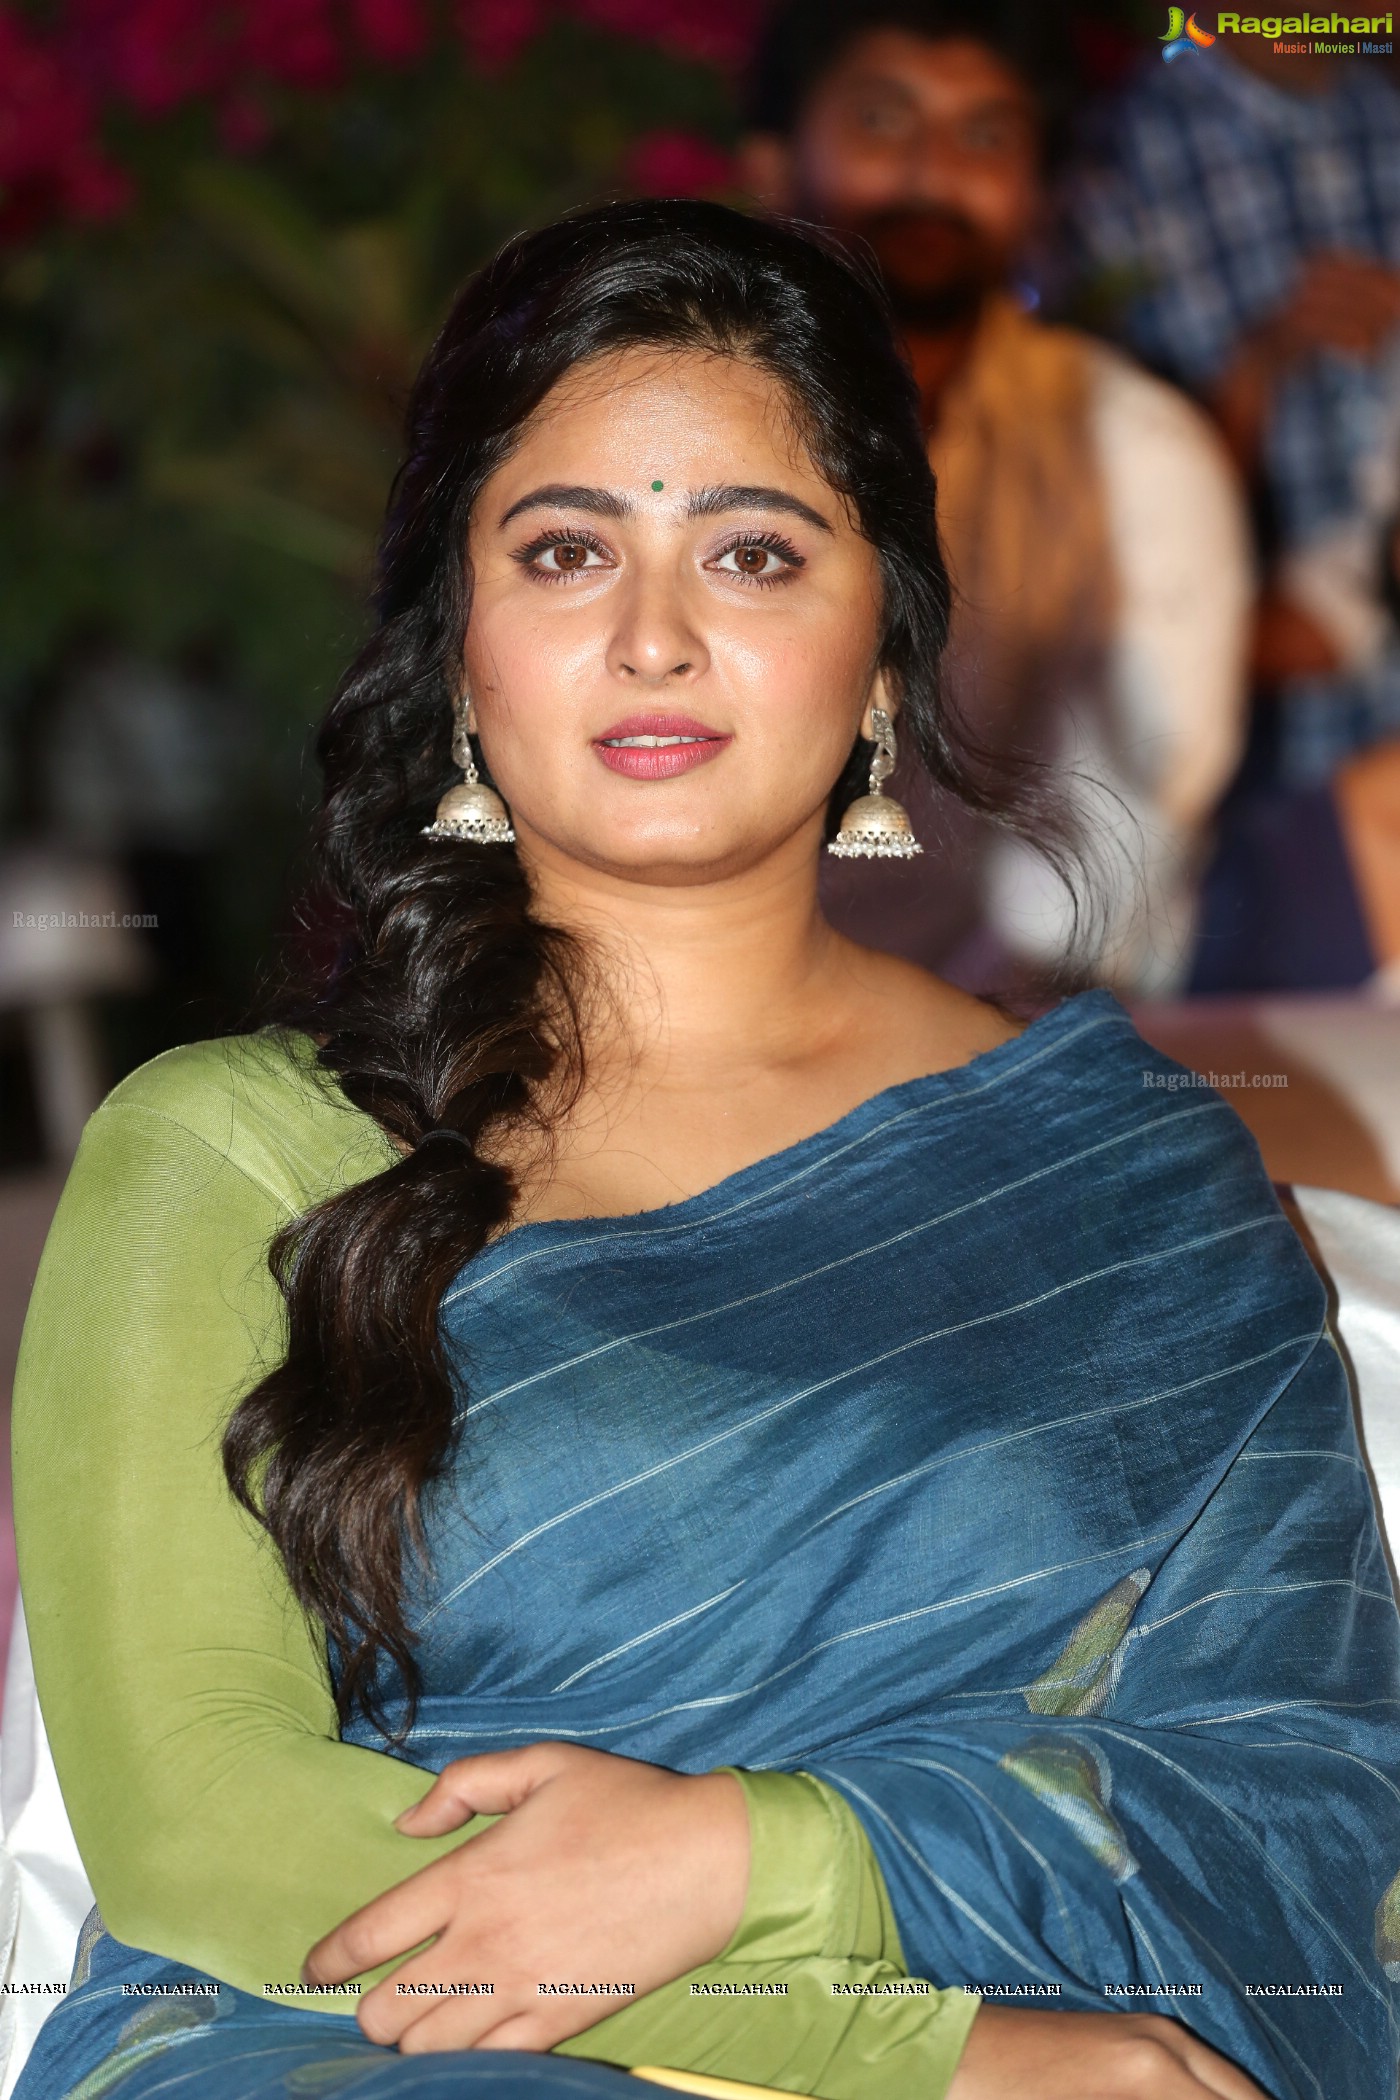 Anushka Shetty at Awe! Pre-Release Event (Posters)